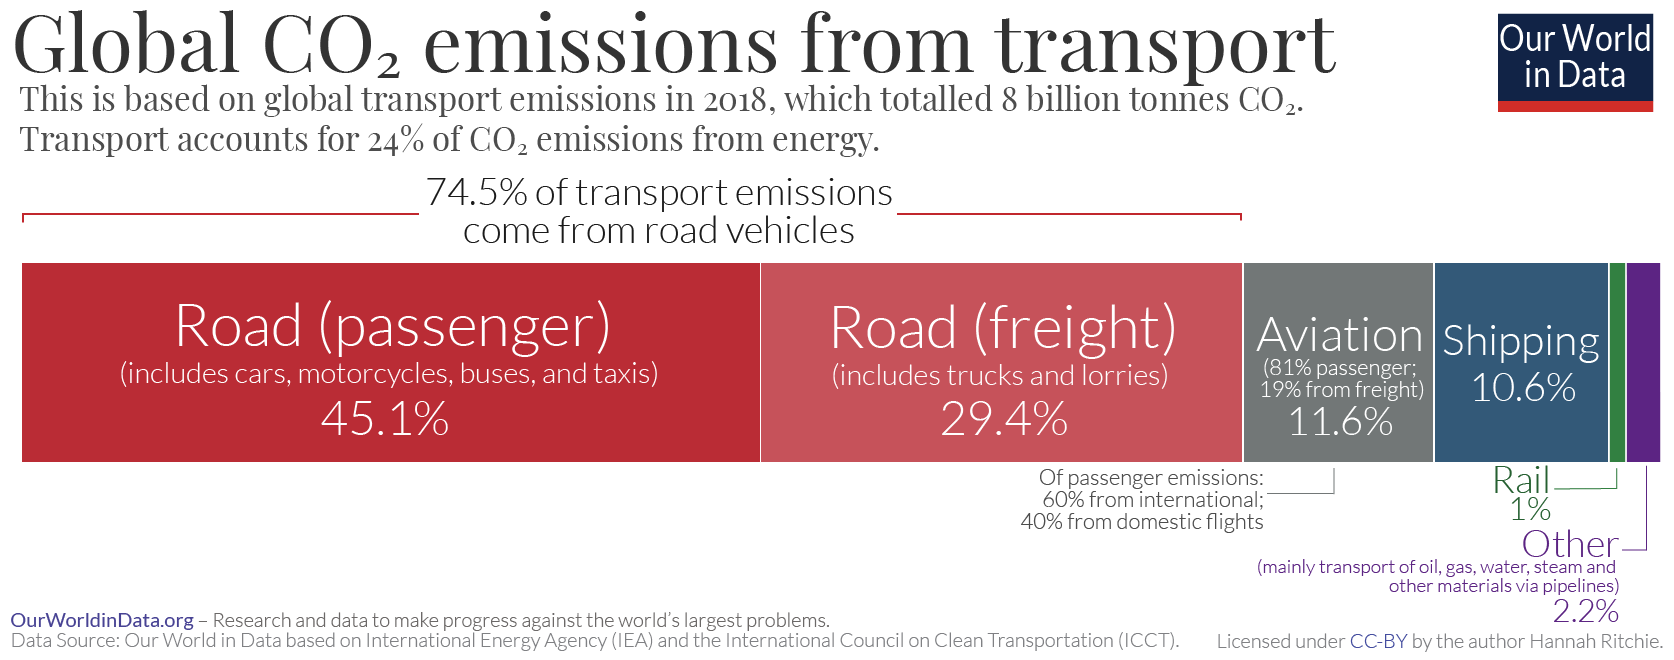 P18 - Global GHG Emissions from Transport by mode